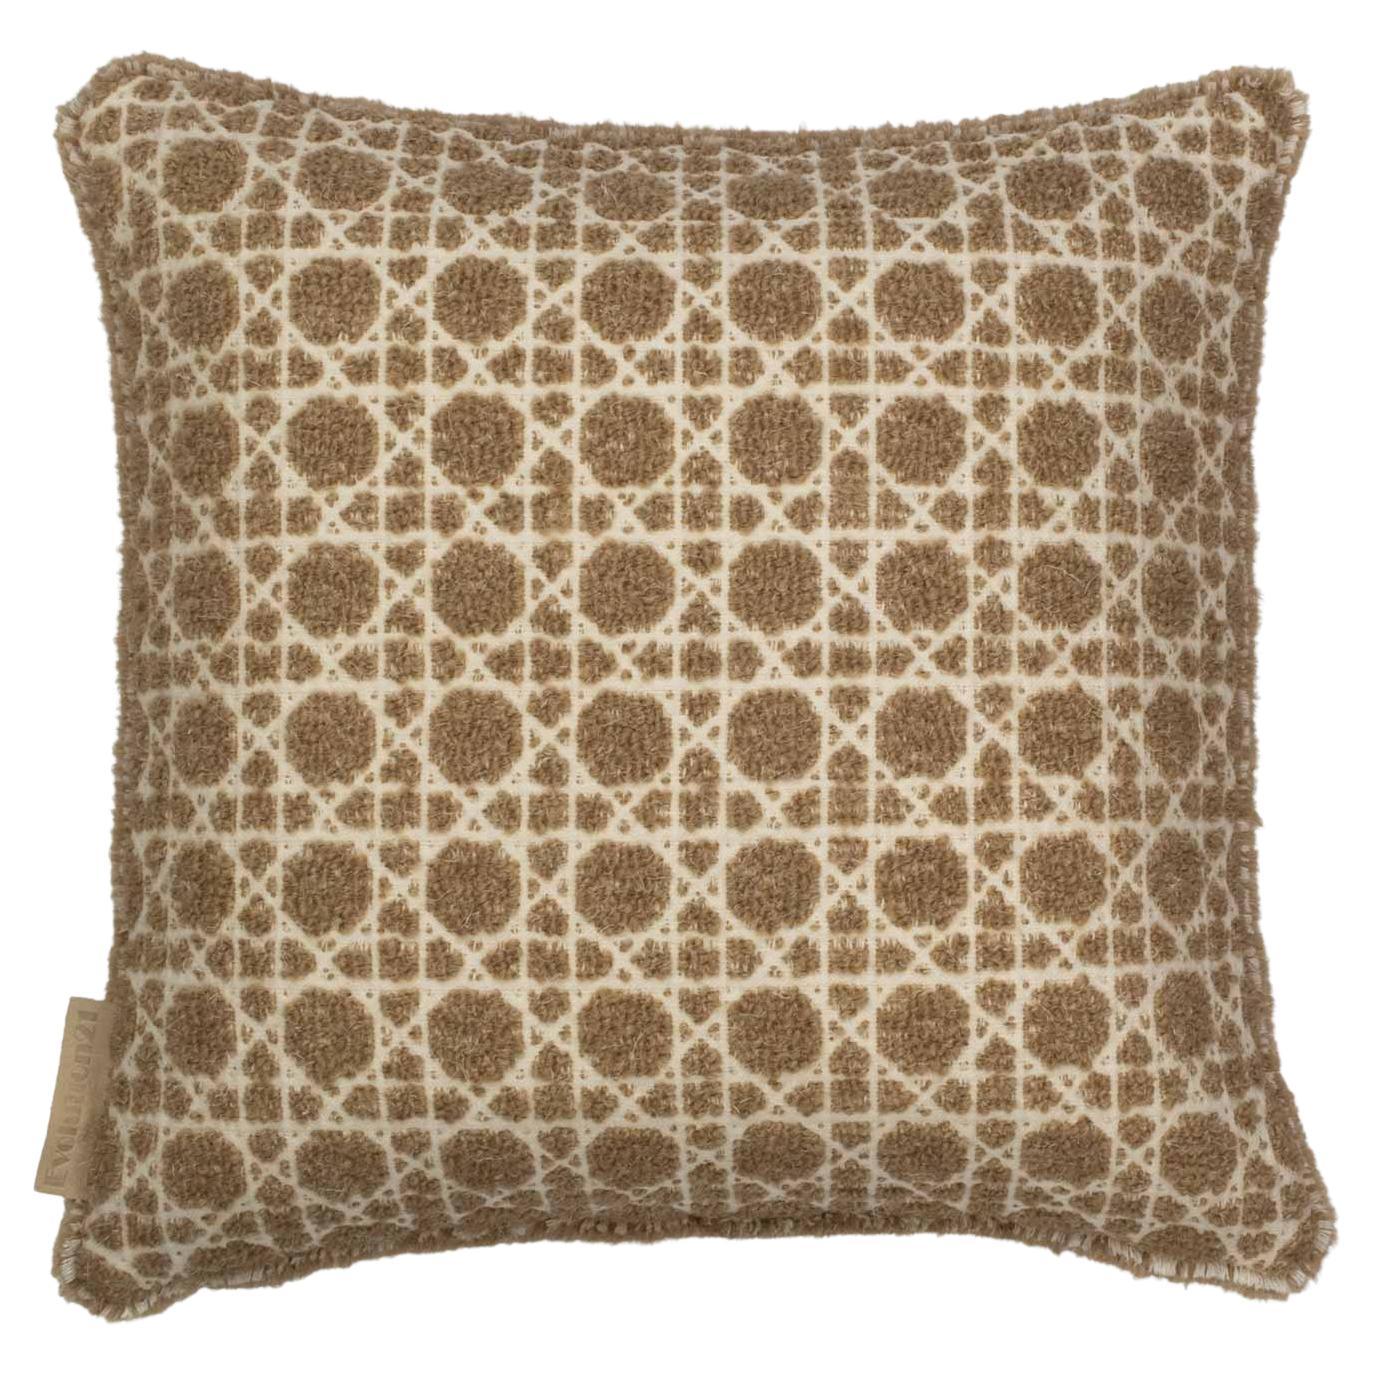 Modern Textured Patterned Throw Pillow Sand Yellow "Cannage" by Evolution21 For Sale